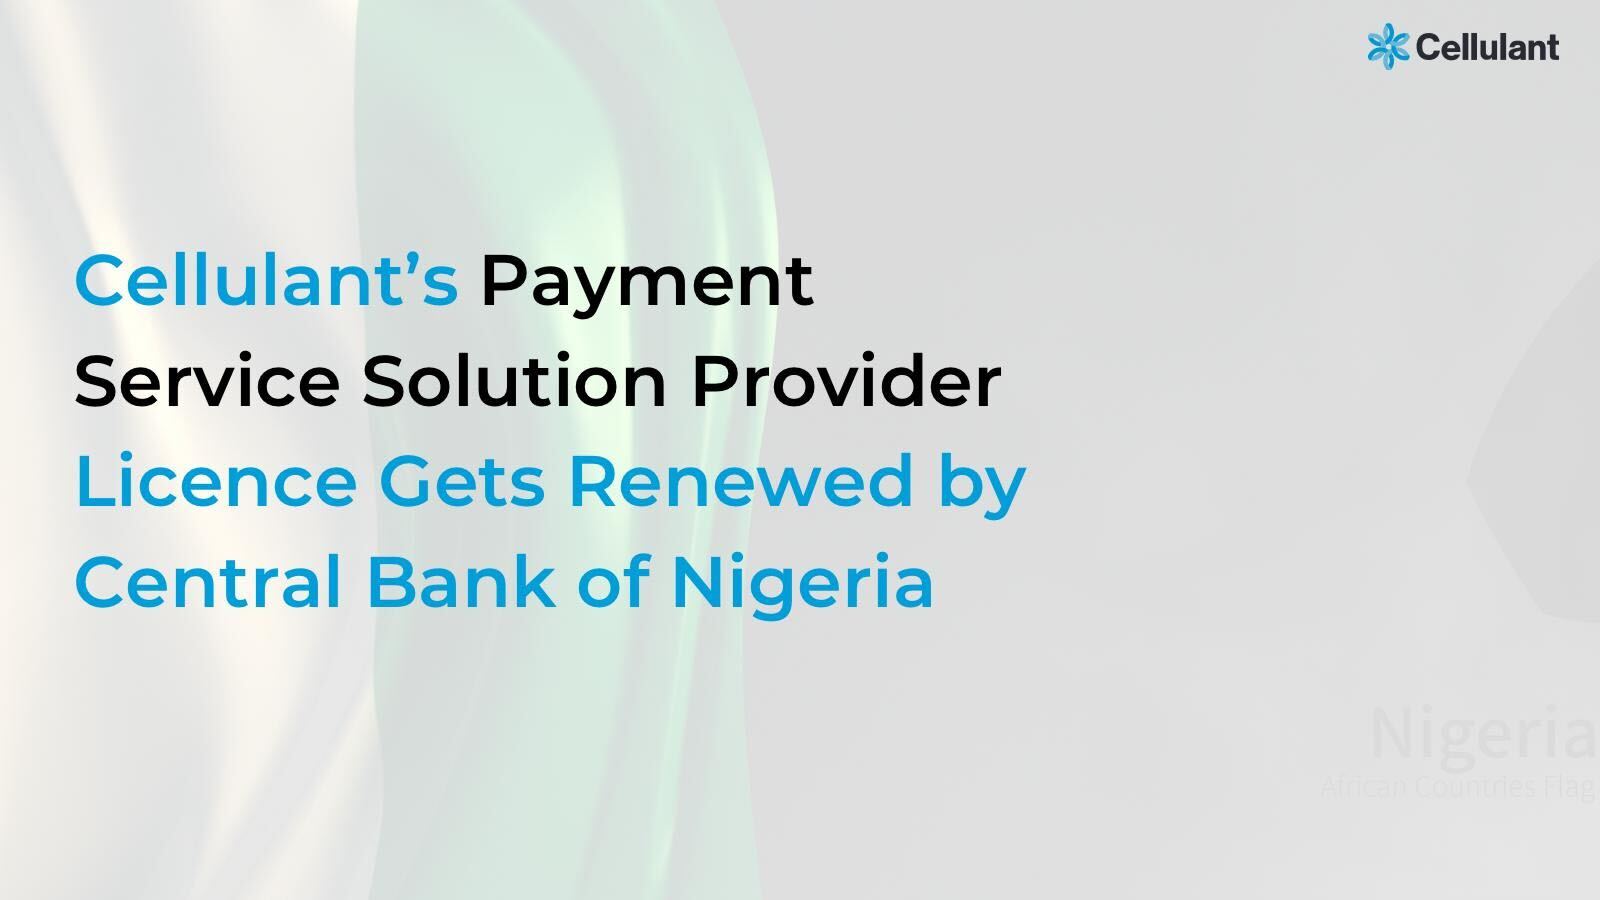 <strong>Cellulant’s Payment Service Solution Provider Licence Gets Renewed by Central Bank of Nigeria</strong>